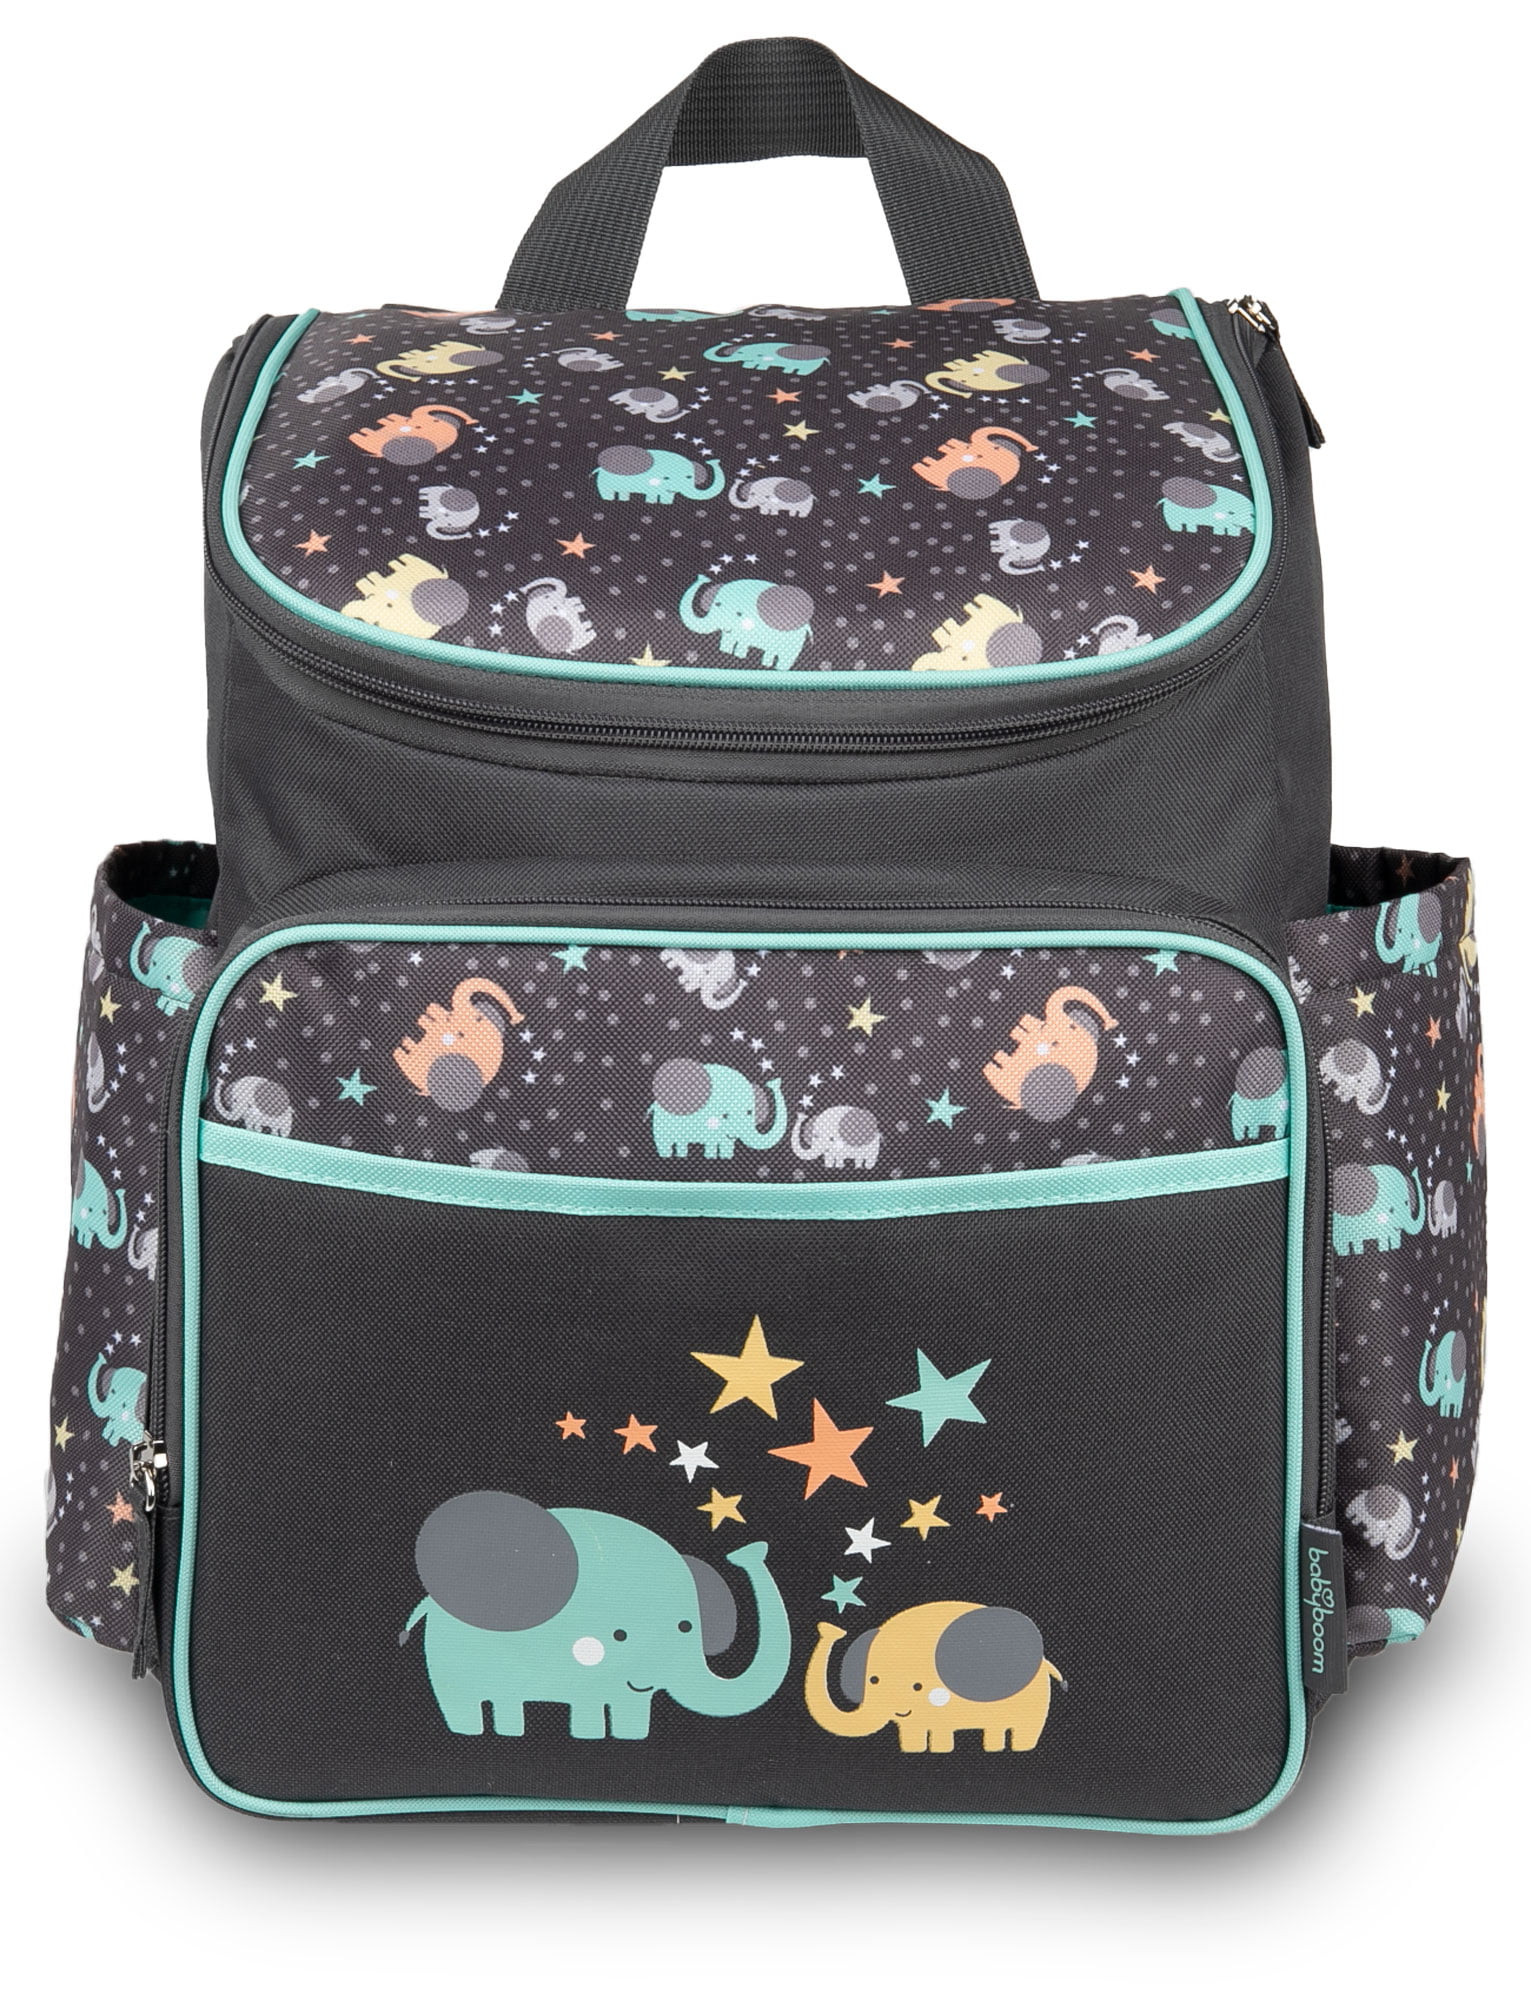 Gray Backpack Diaper Bag with Changing Pad